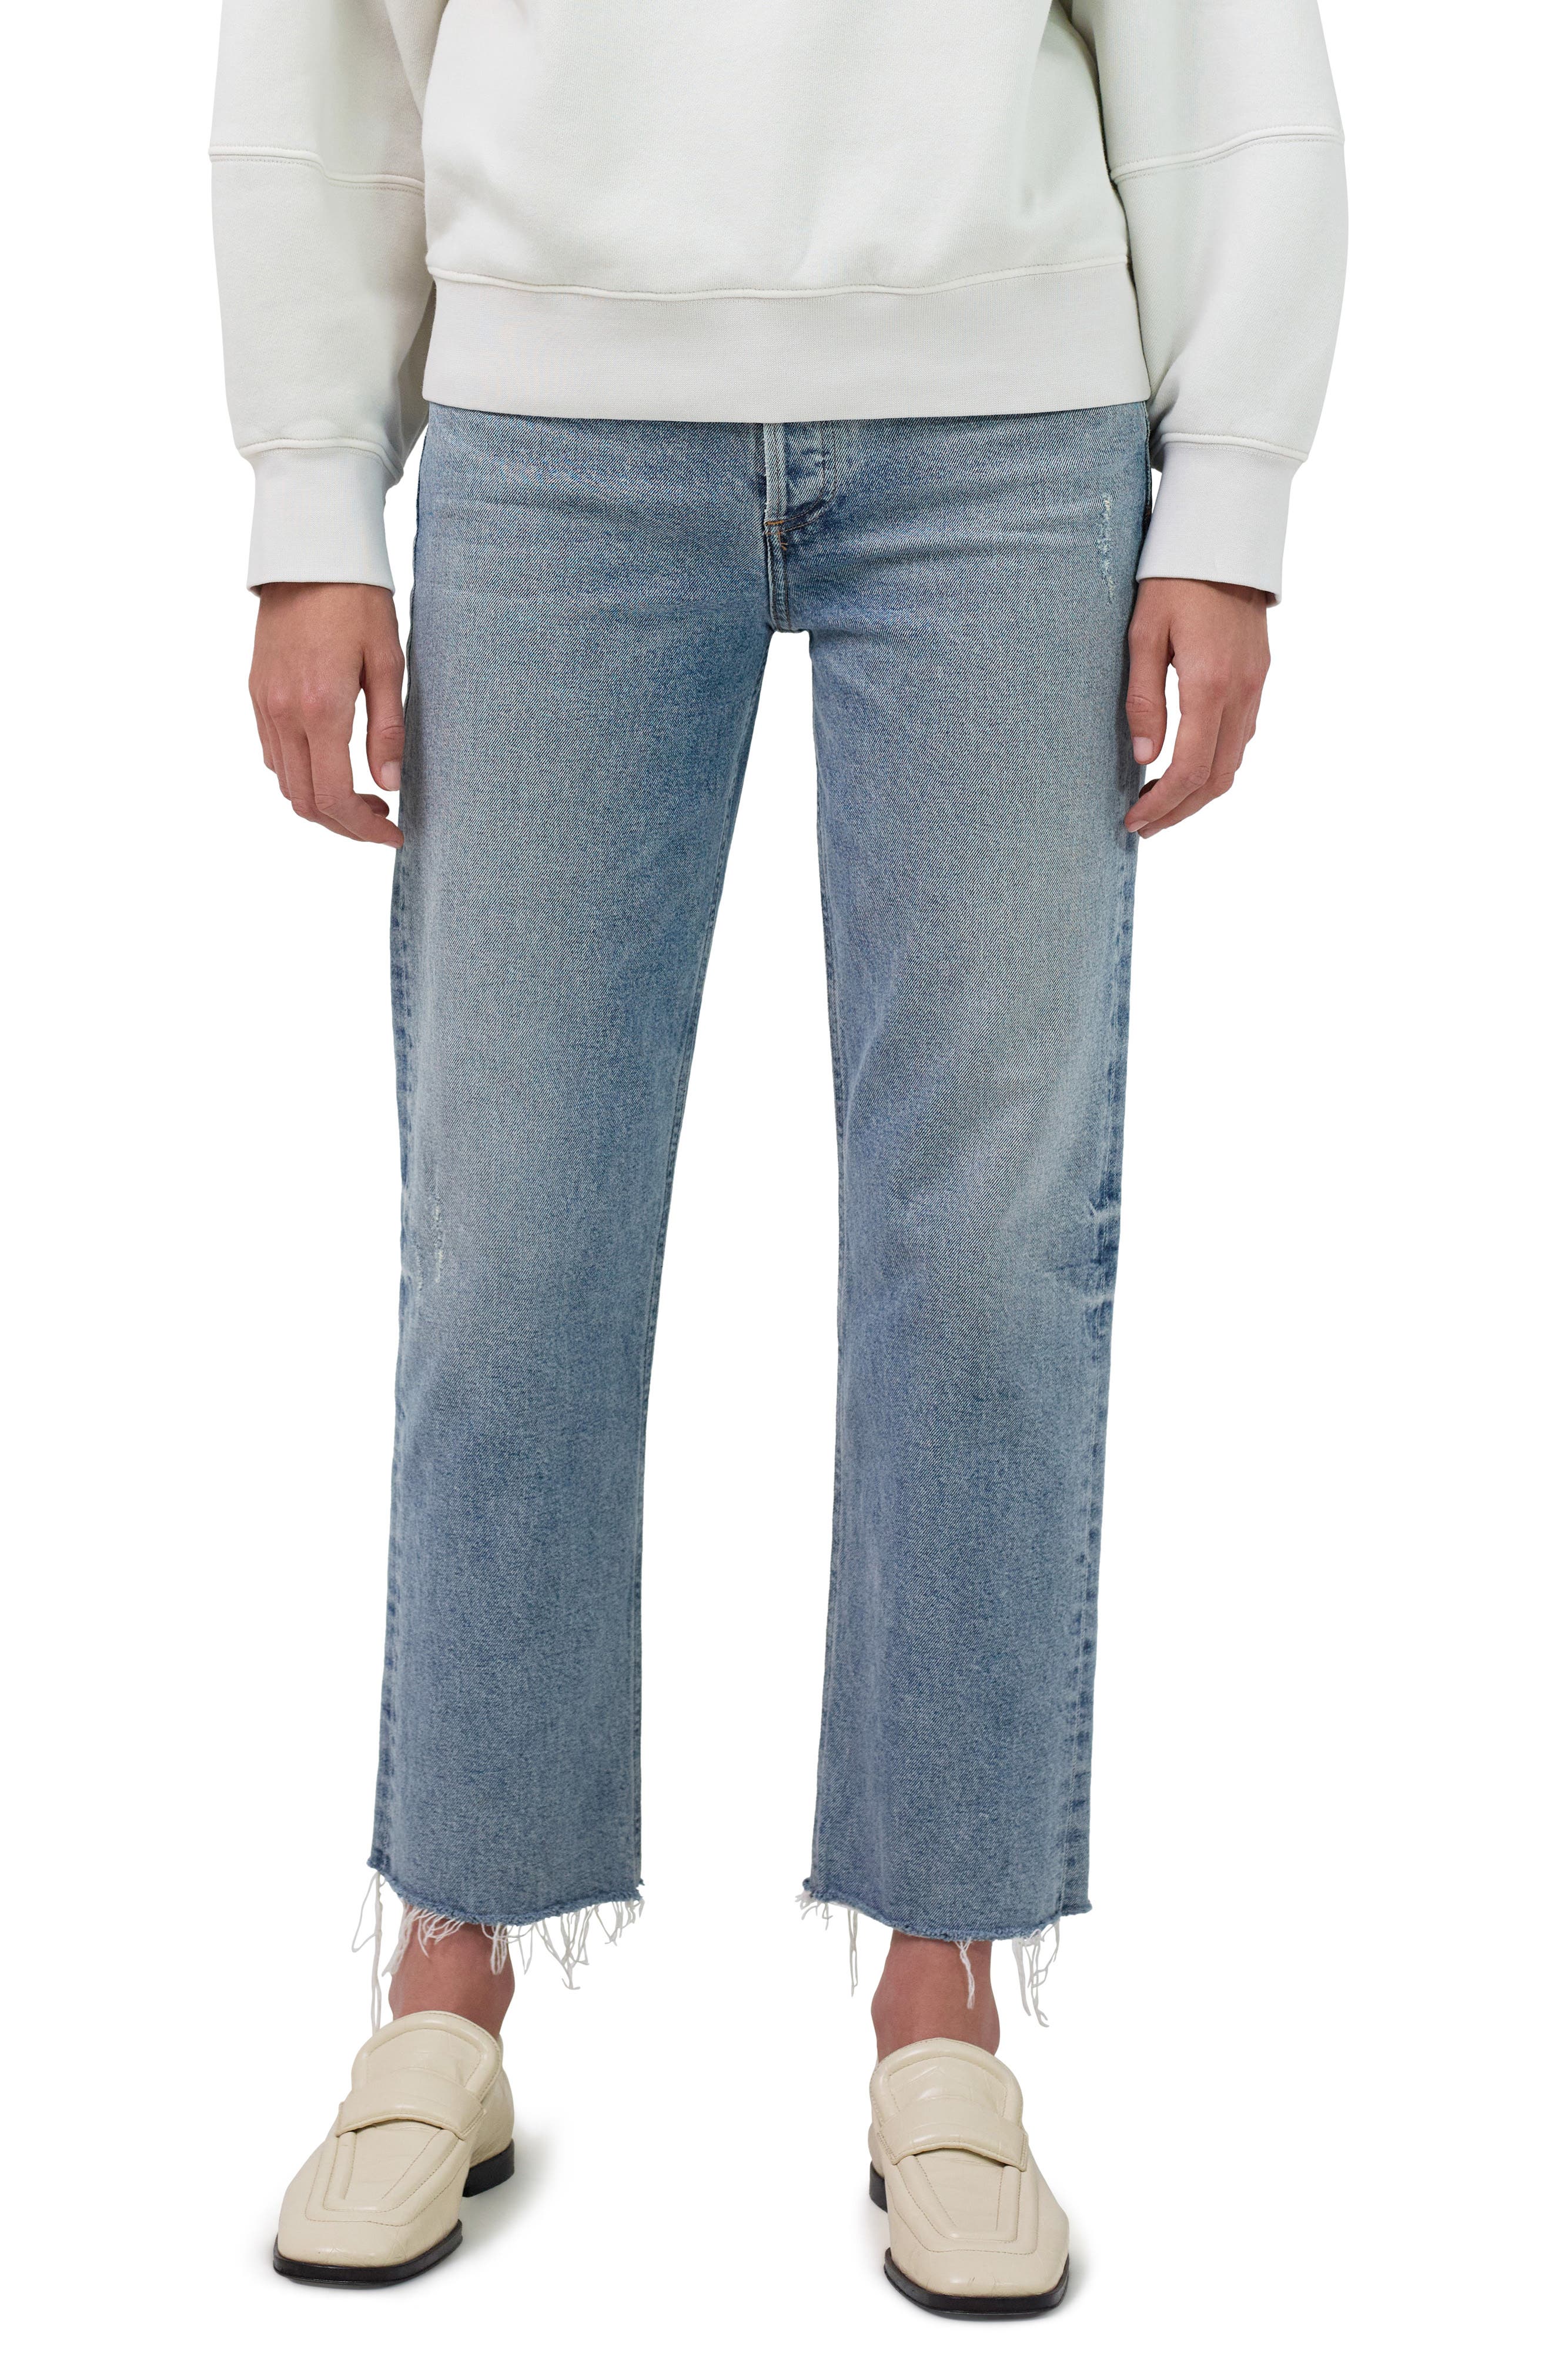 Citizens of Humanity Denim High-Rise Straight Jeans Florence in Blau Damen Bekleidung Jeans Jeans mit gerader Passform 